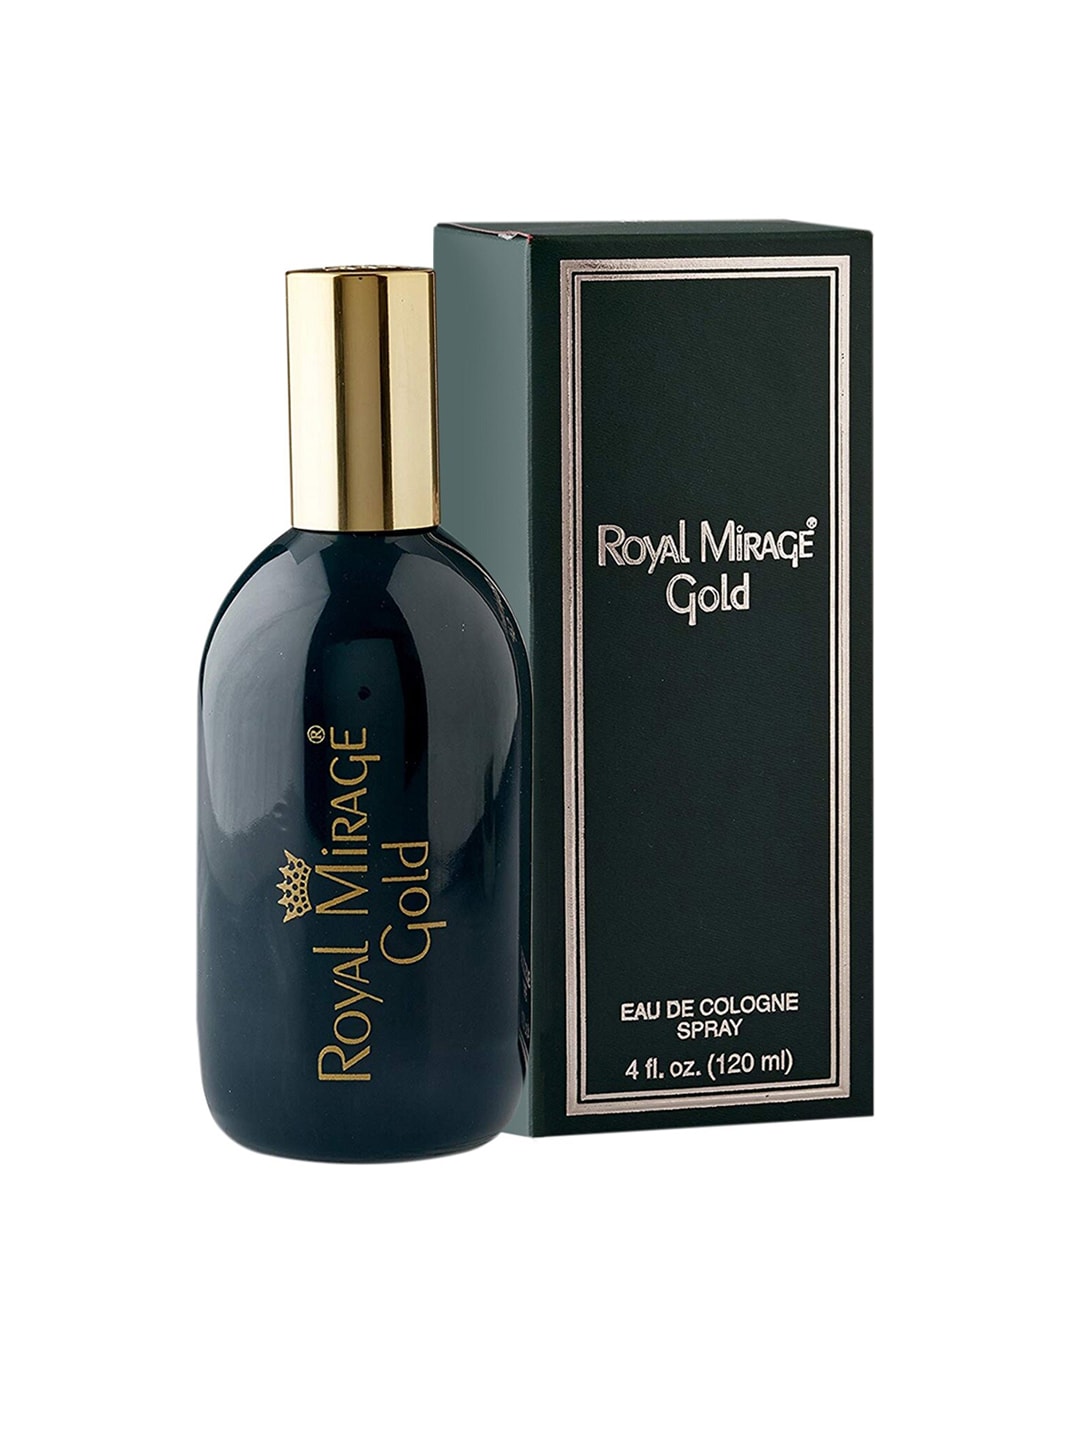 Royal Mirage Gold Long Lasting Eau De Cologne Spray 120 ml Price in India